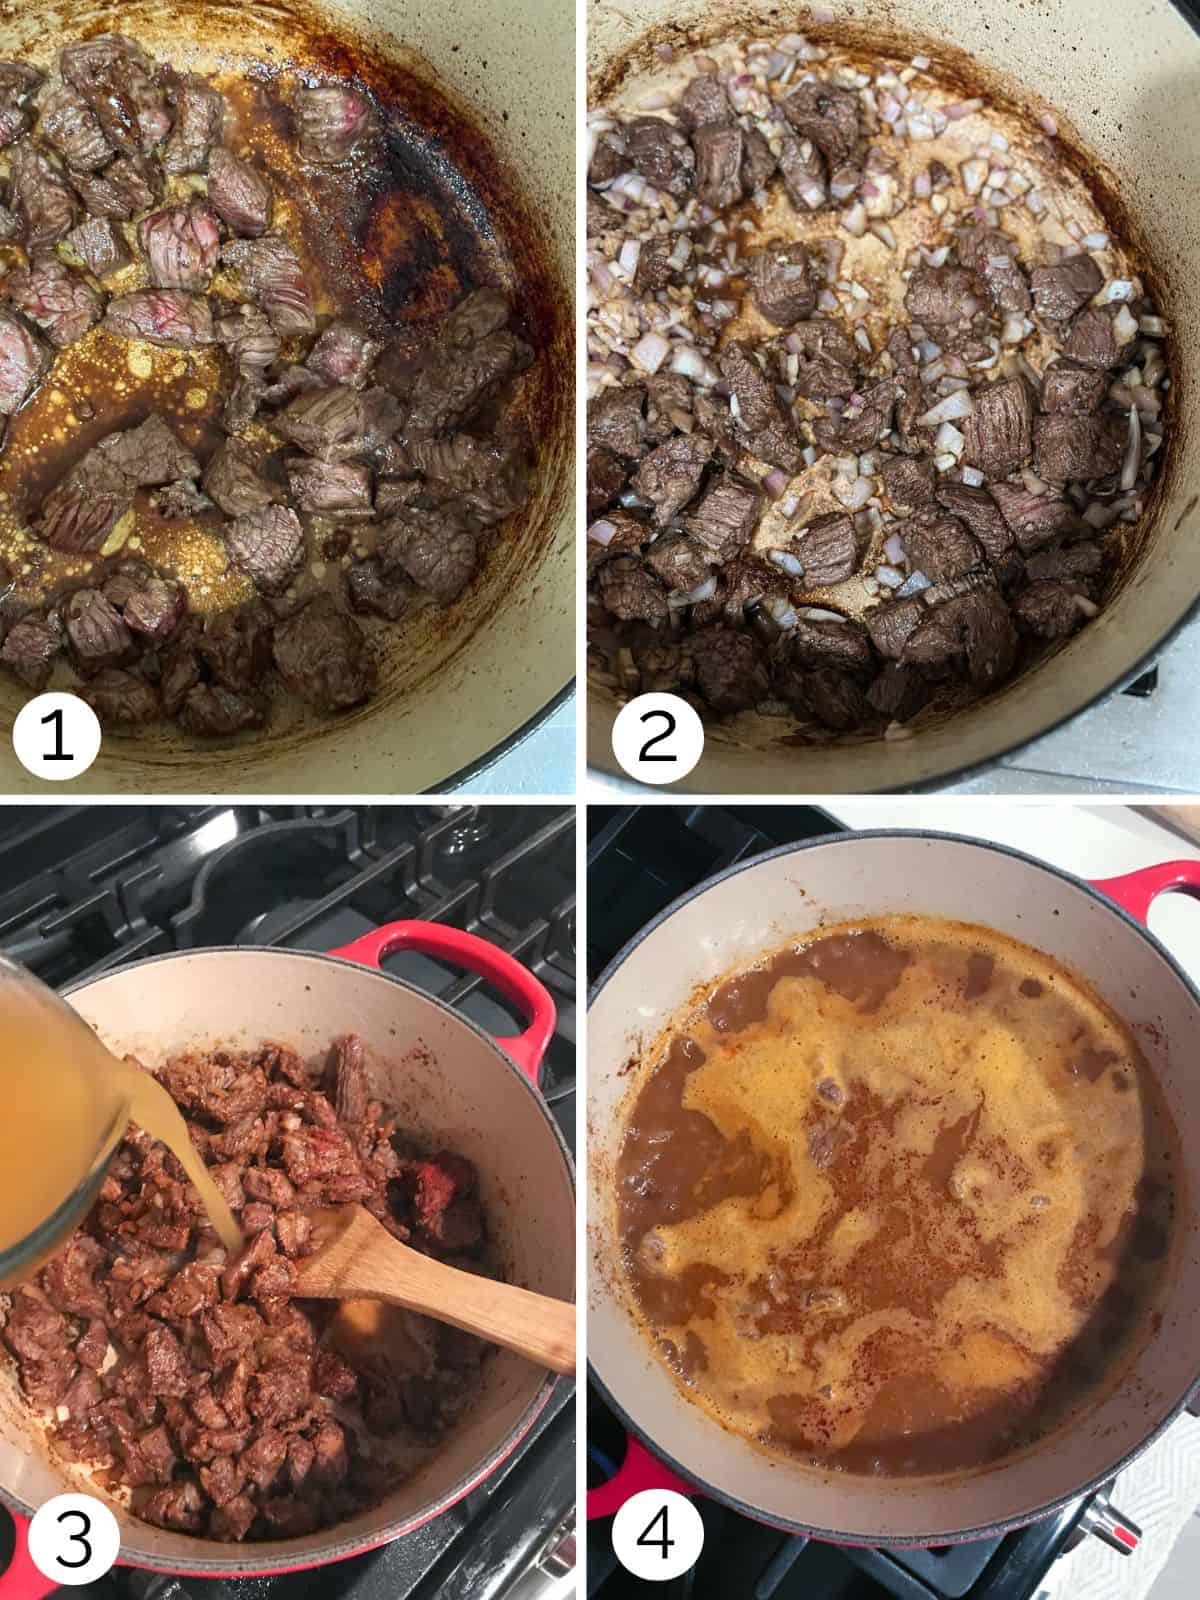 Step by step process of searing beef for chili, adding spices, and simmering the broth.